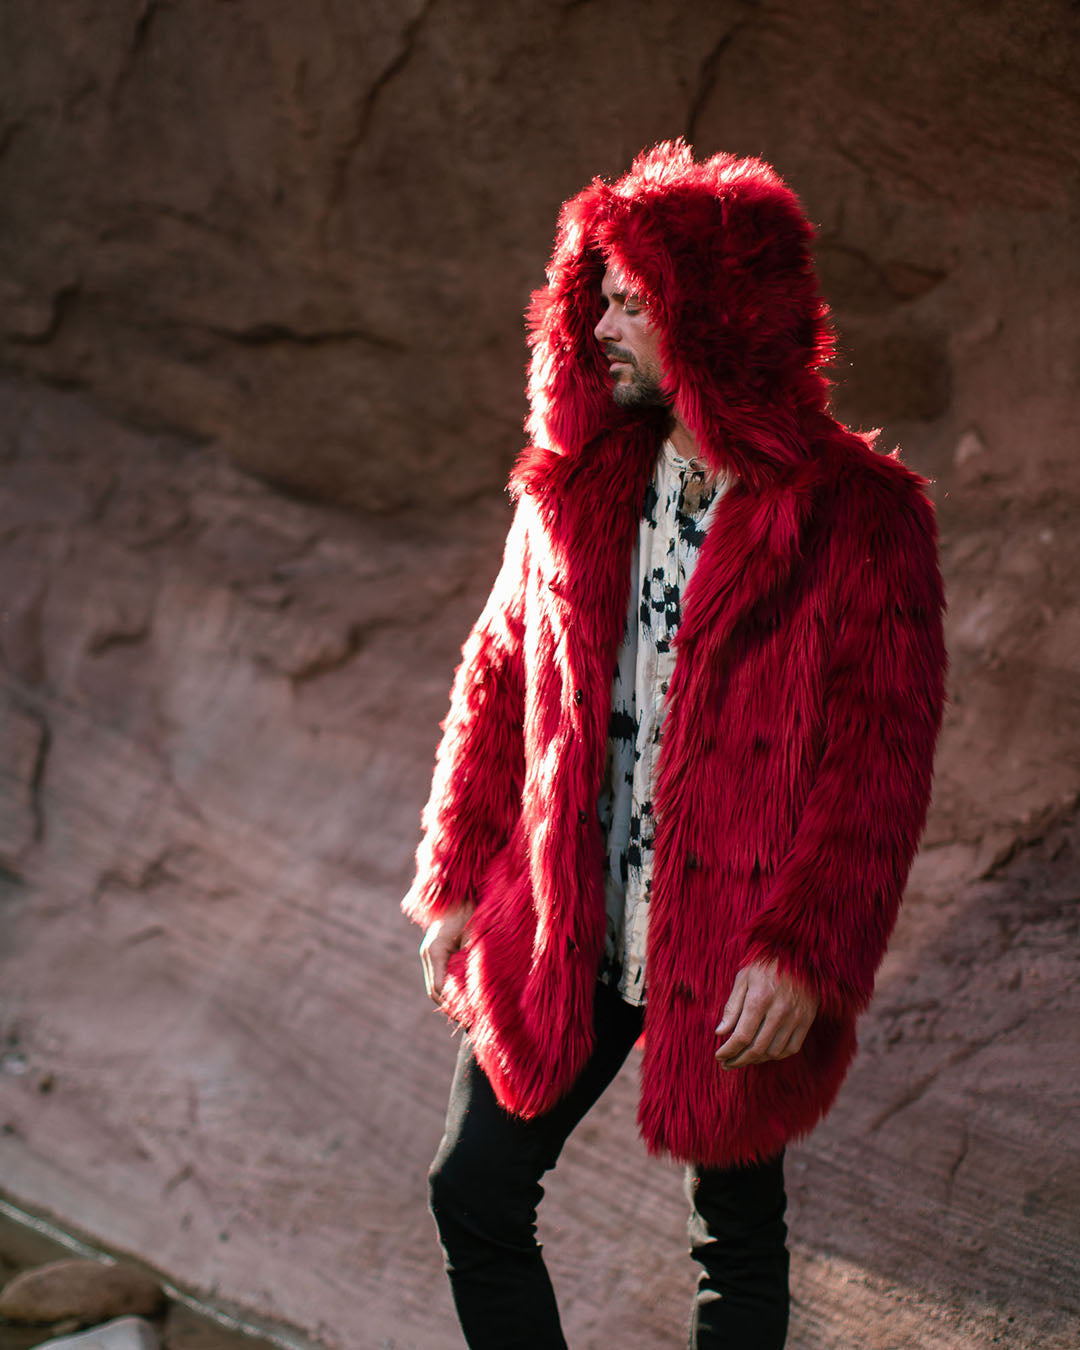 Men's Red Faux Fur Coats - The Best & Most Luxurious Fake Fur